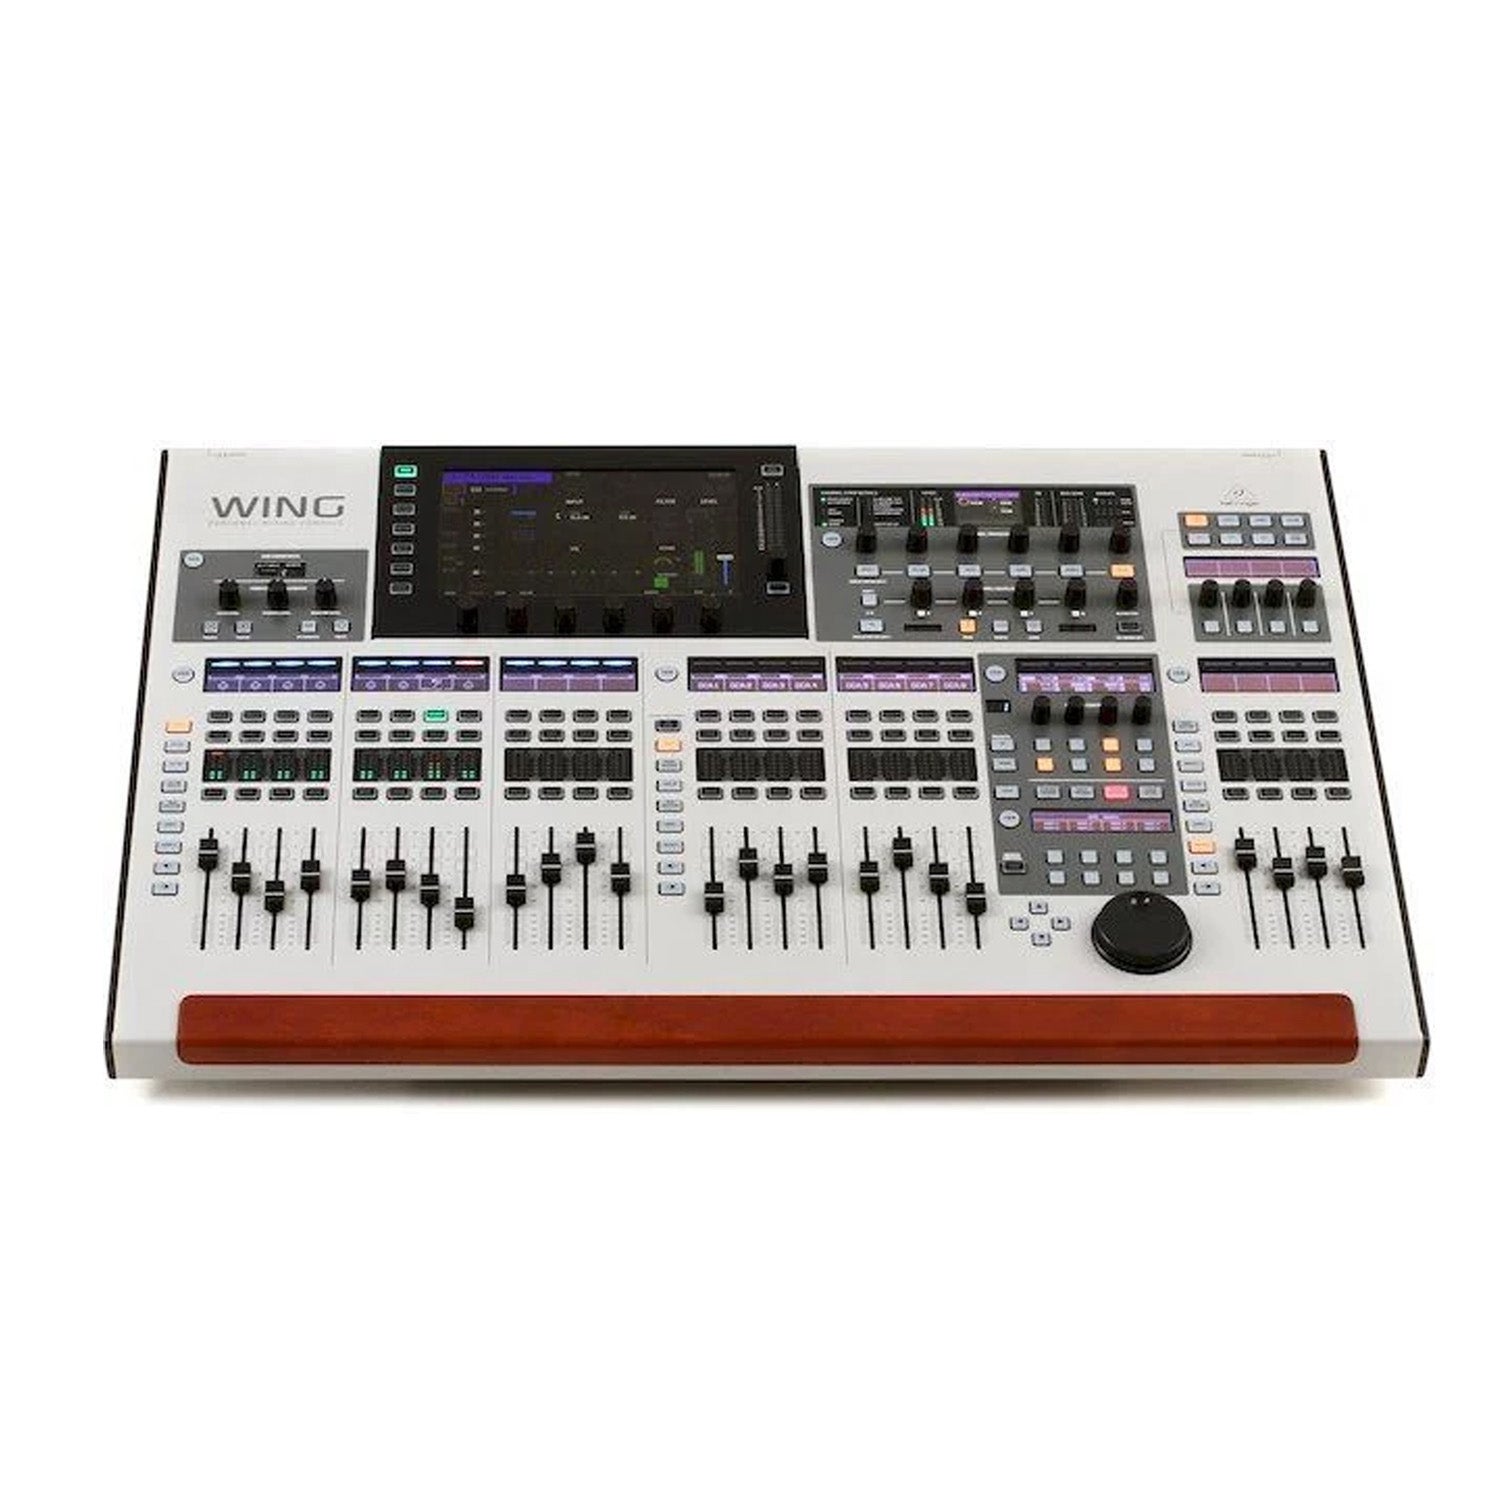 https://www.musicworks.co.nz/content/products/behringer-wing-48-channel-28-bus-digital-mixing-console-1-wing.jpg?canvas=1:1&width=2500